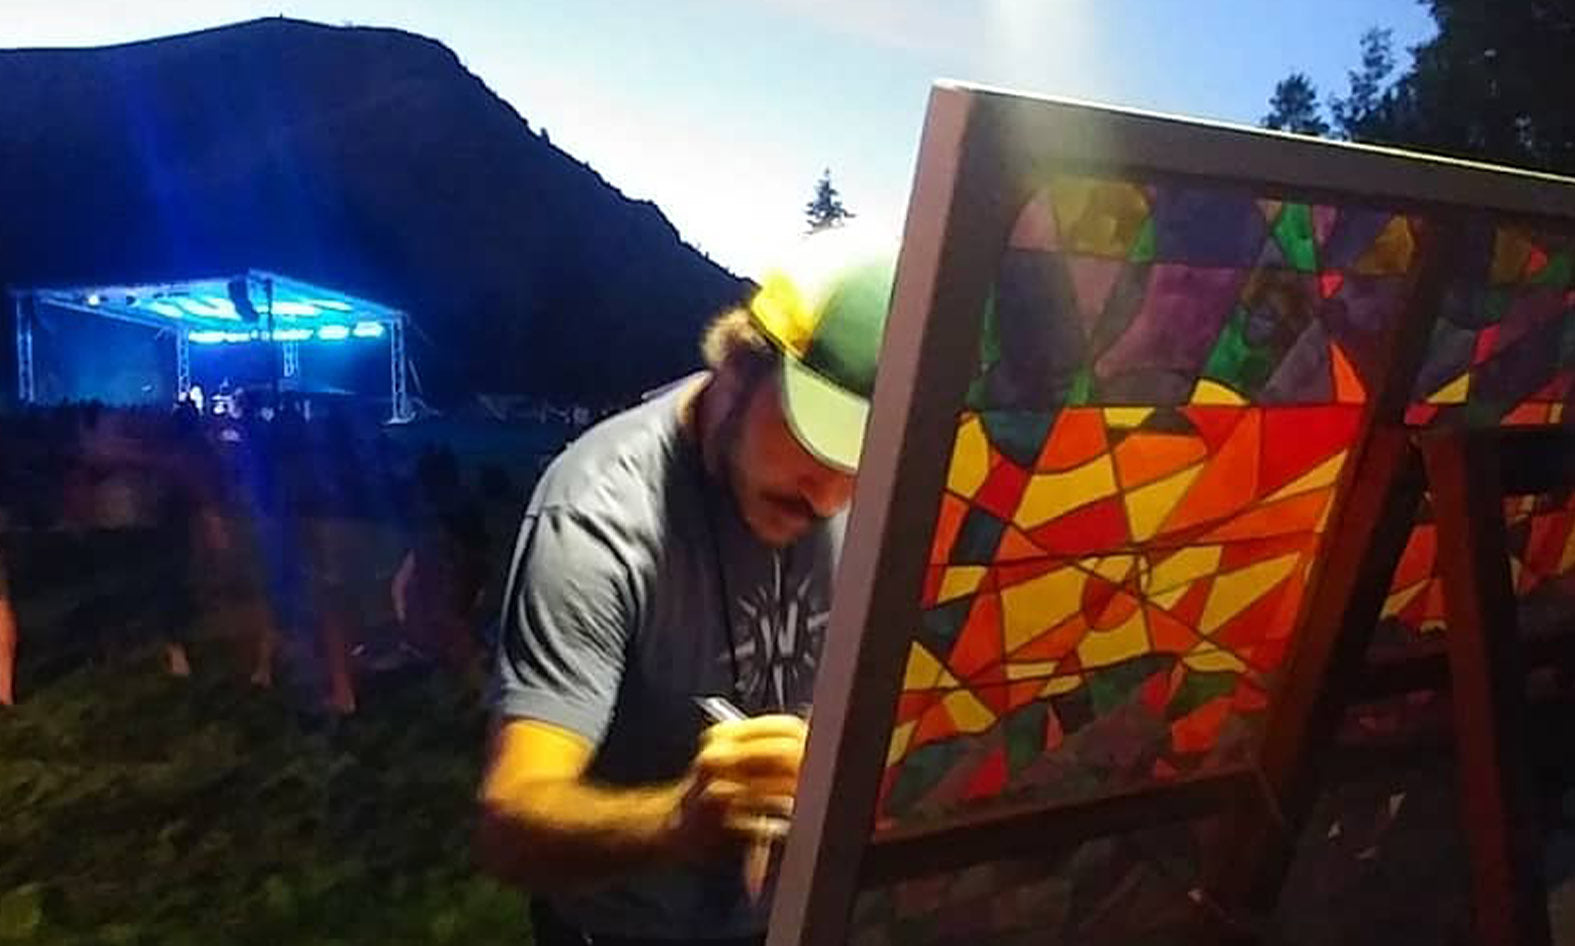 2019: Summer's End Festival Live Painting